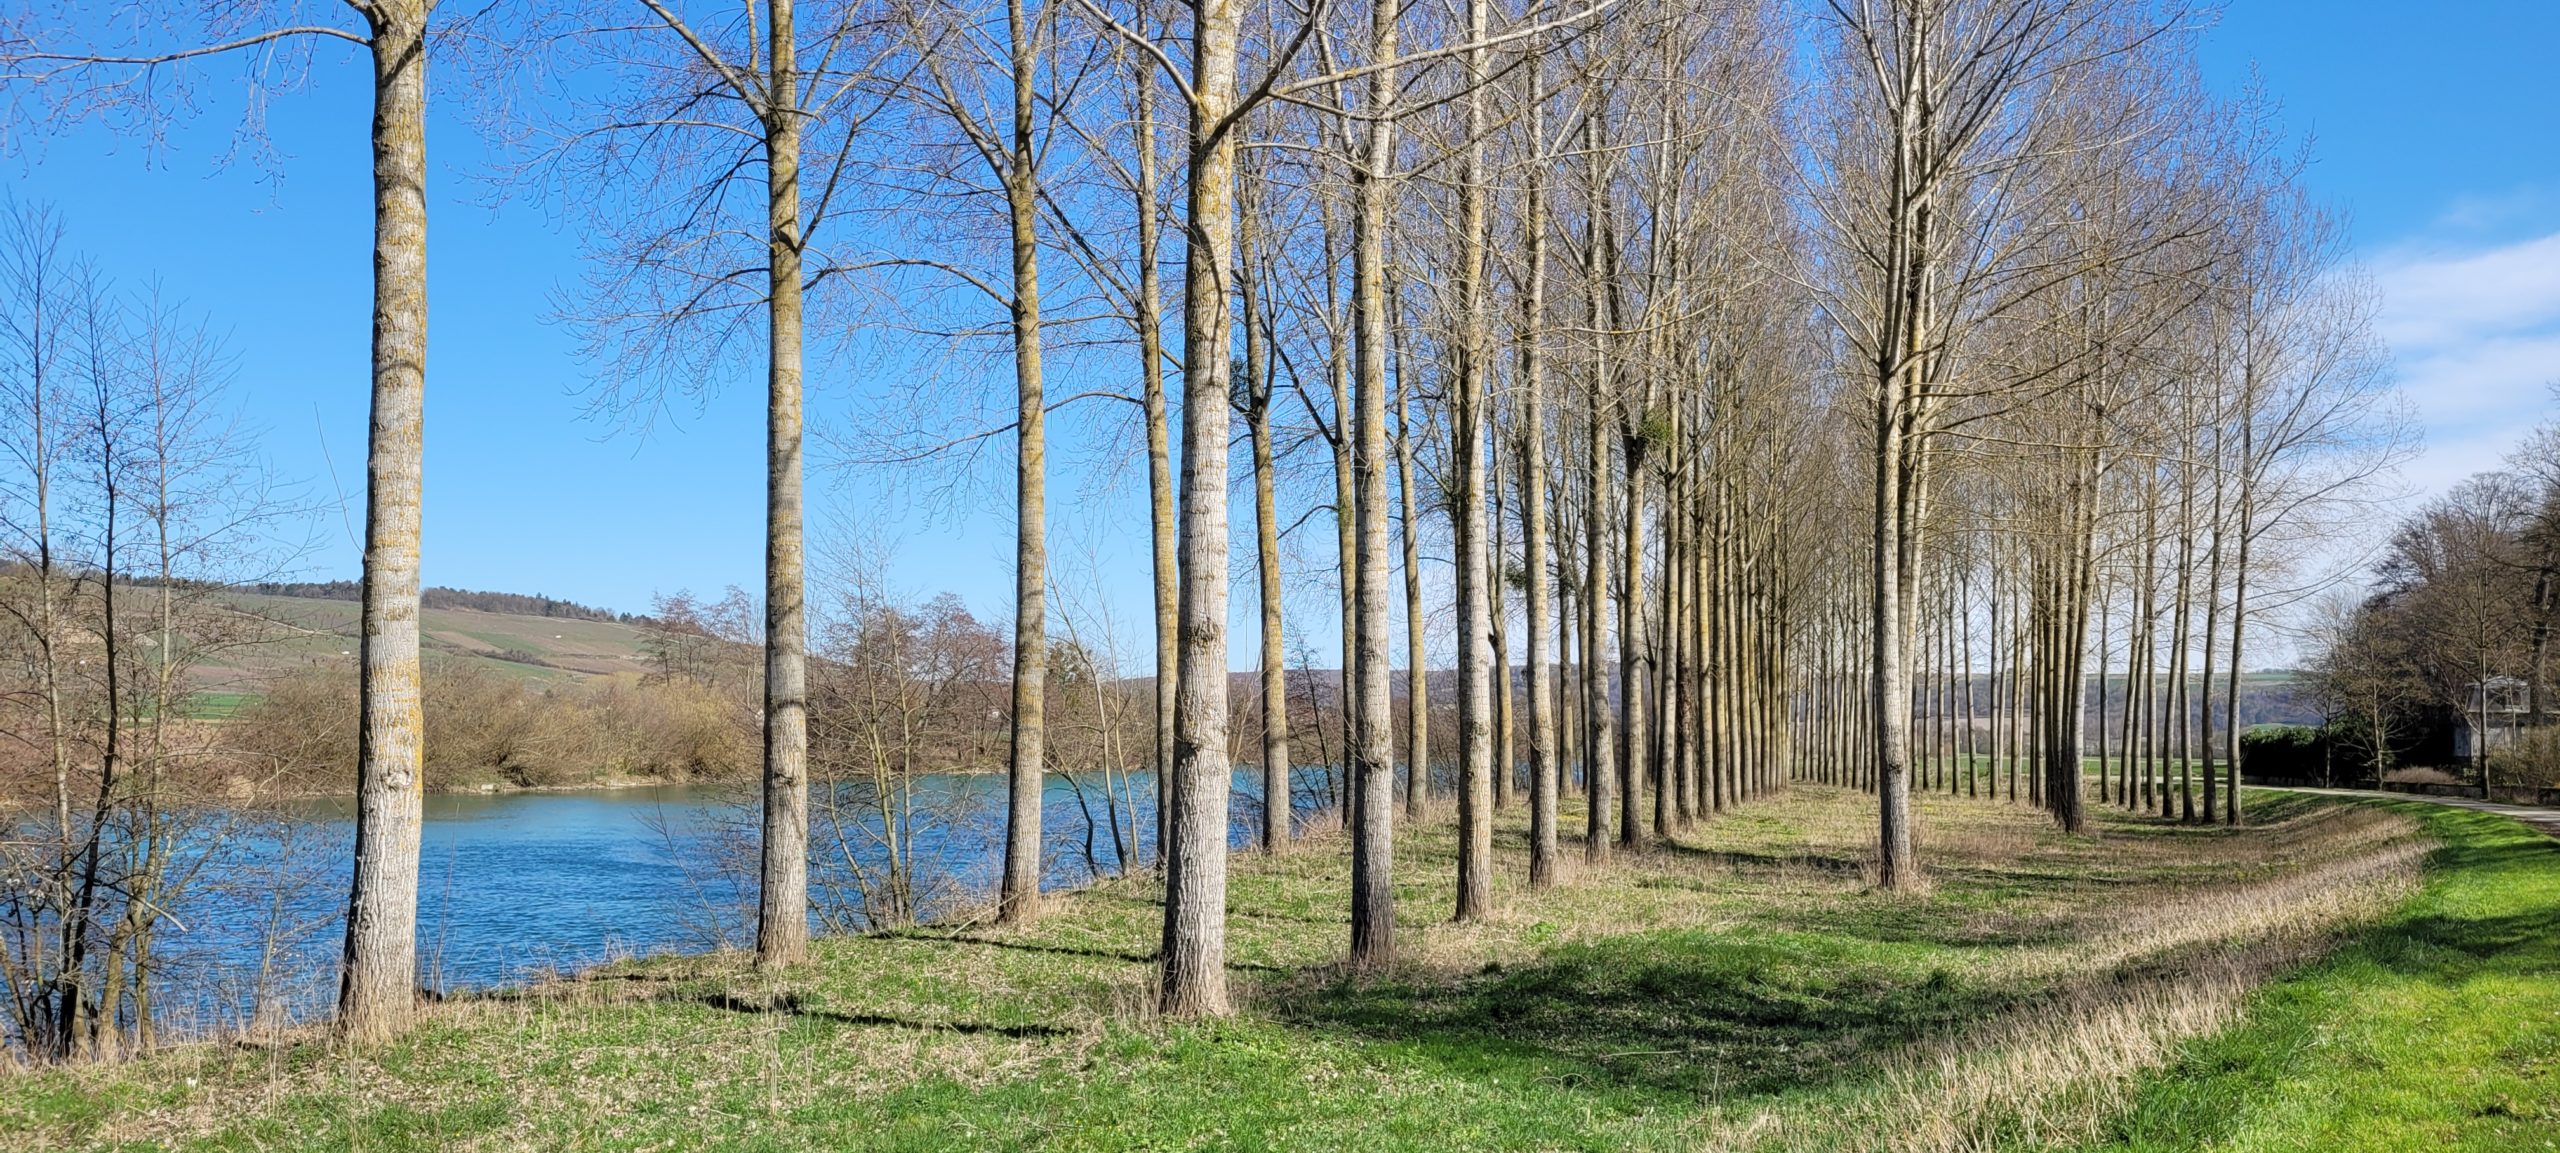 rows of tall trees next to a river